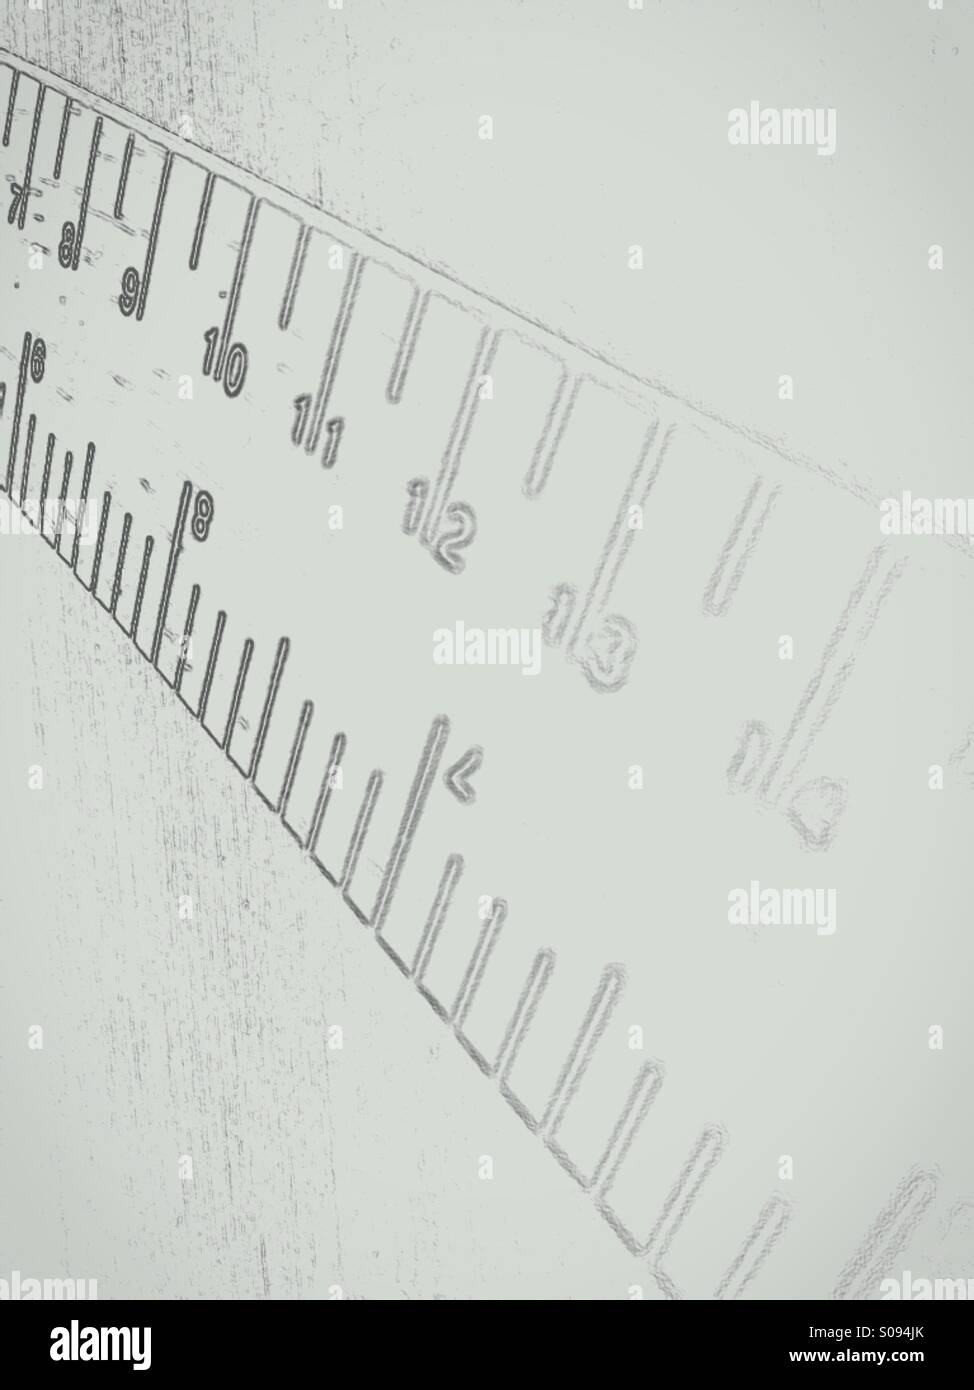 Graphic of a wooden ruler in inches and centimetres. Stock Photo